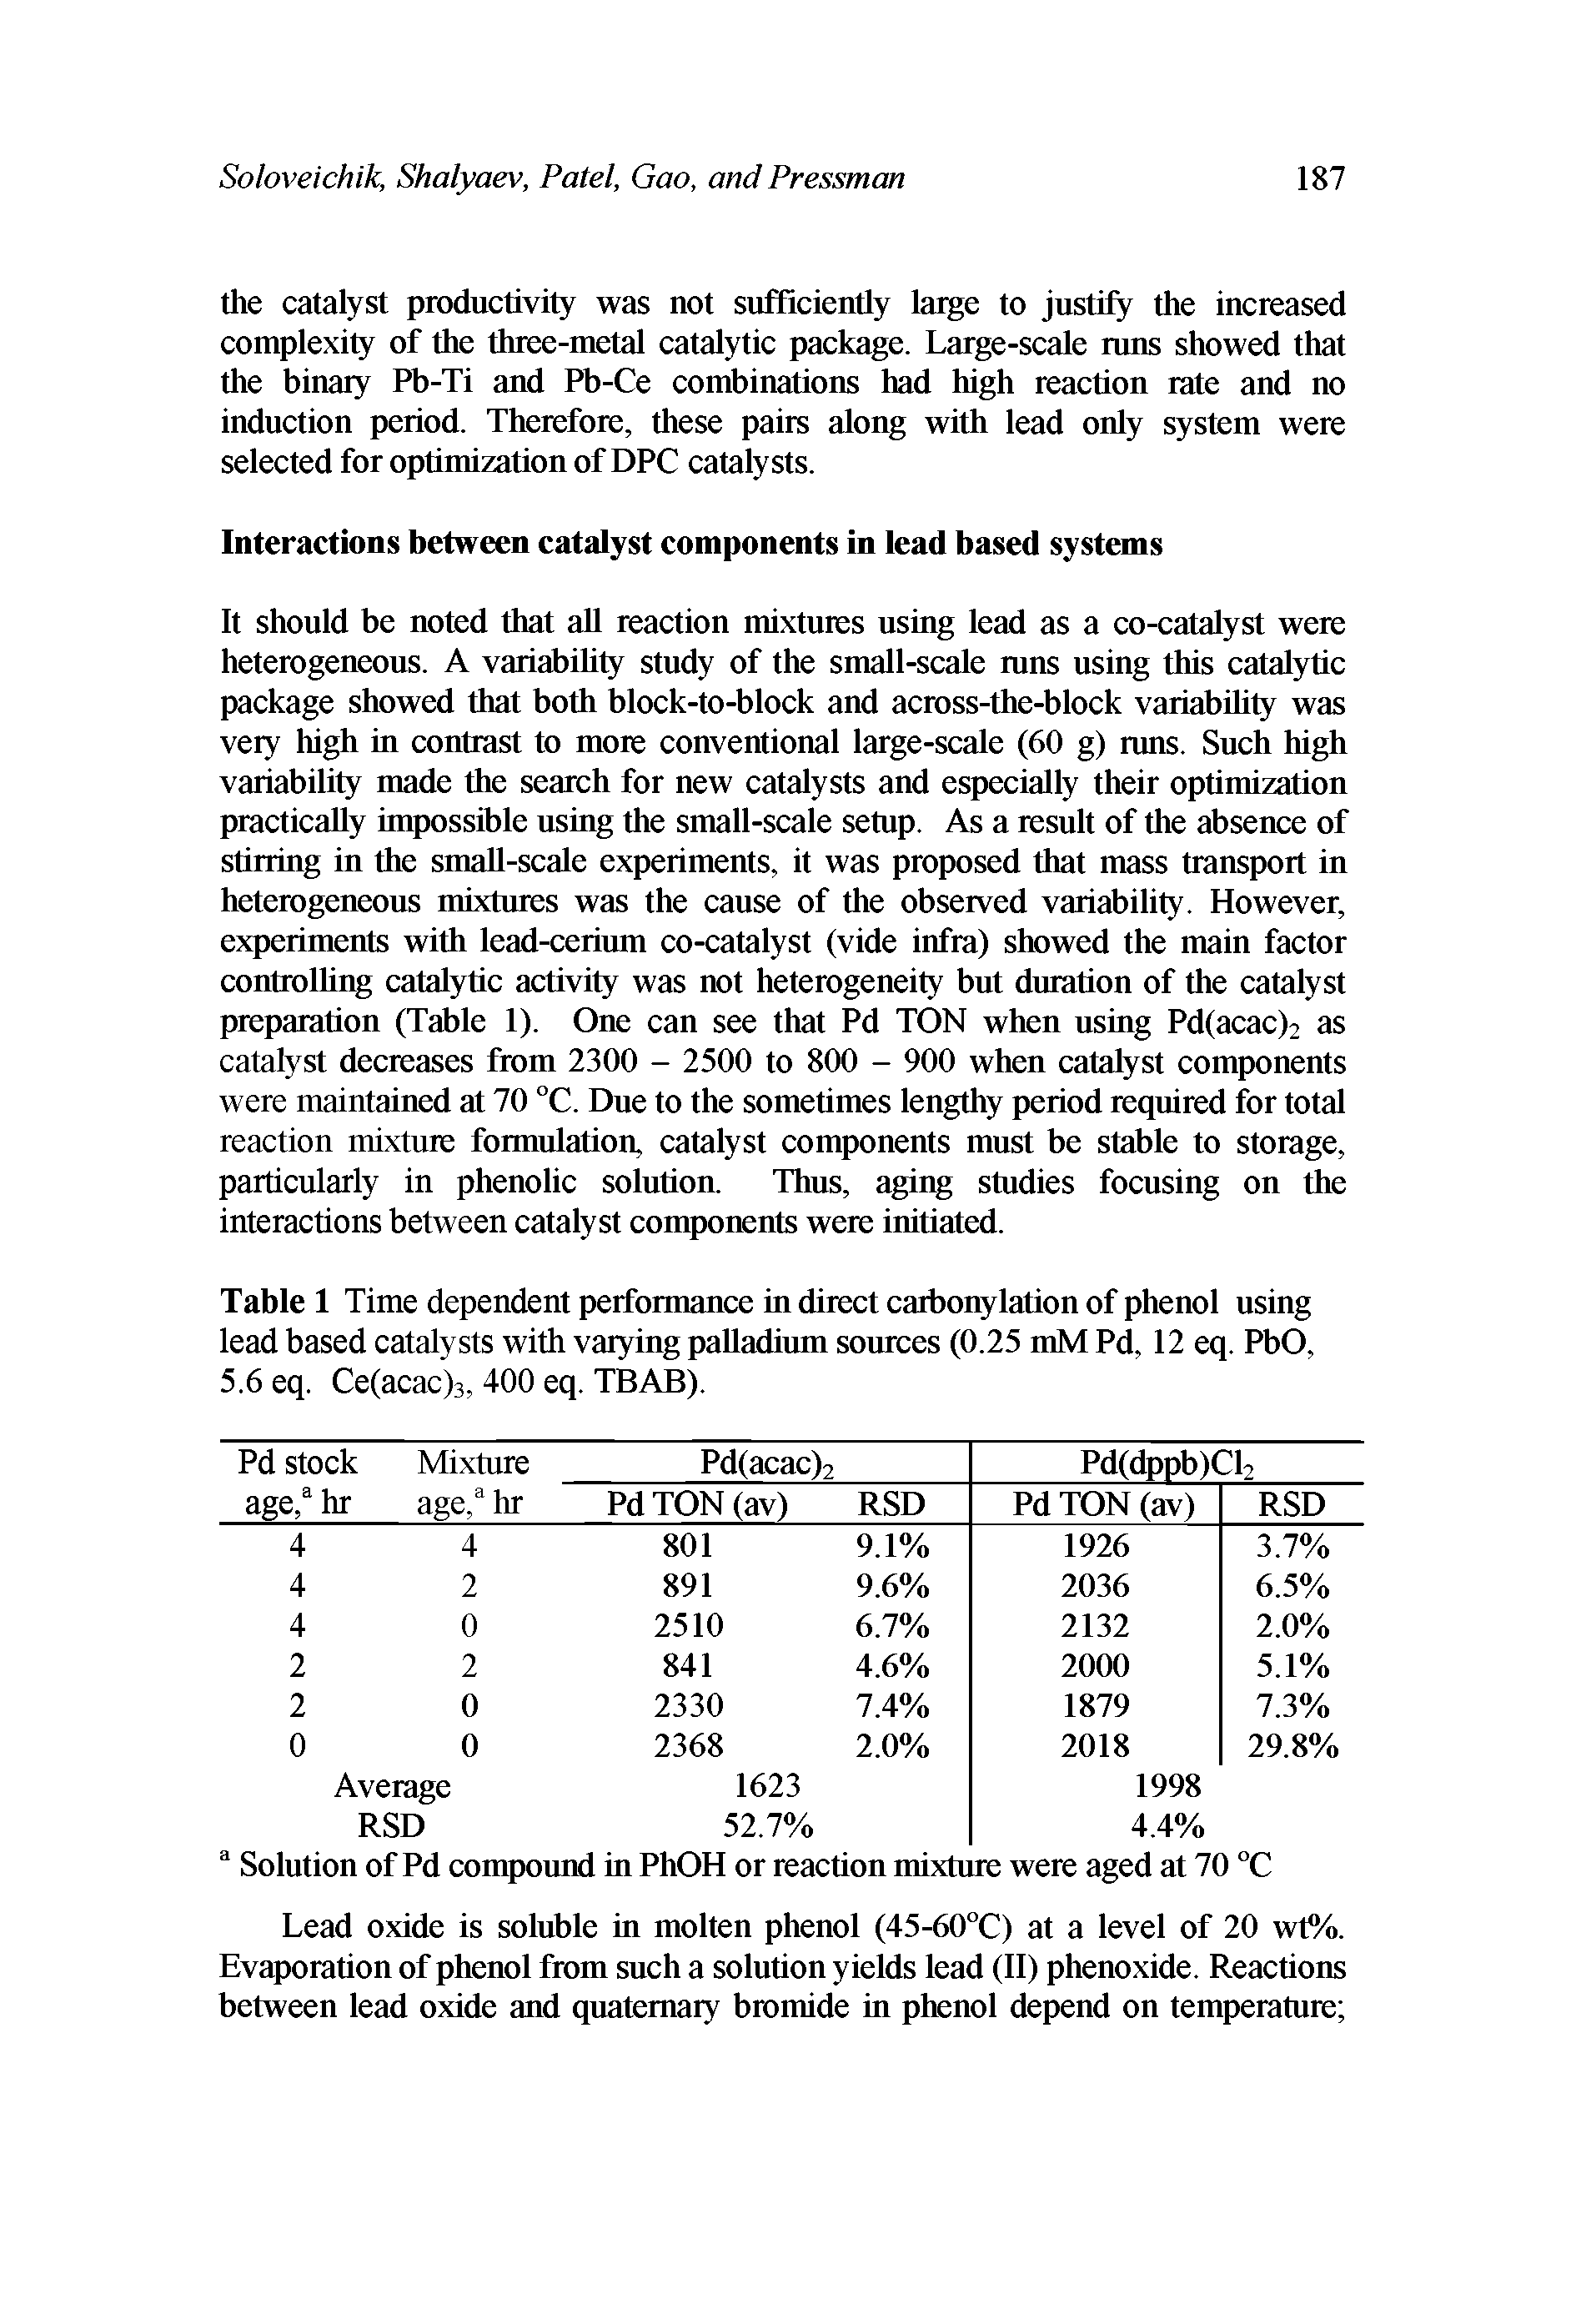 Table 1 Time dependent performance in direct carbonylation of phenol using lead based catalysts with varying palladium sources (0.25 mM Pd, 12 eq. PbO, 5.6 eq. Ce(acac)3, 400 eq. TBAB).